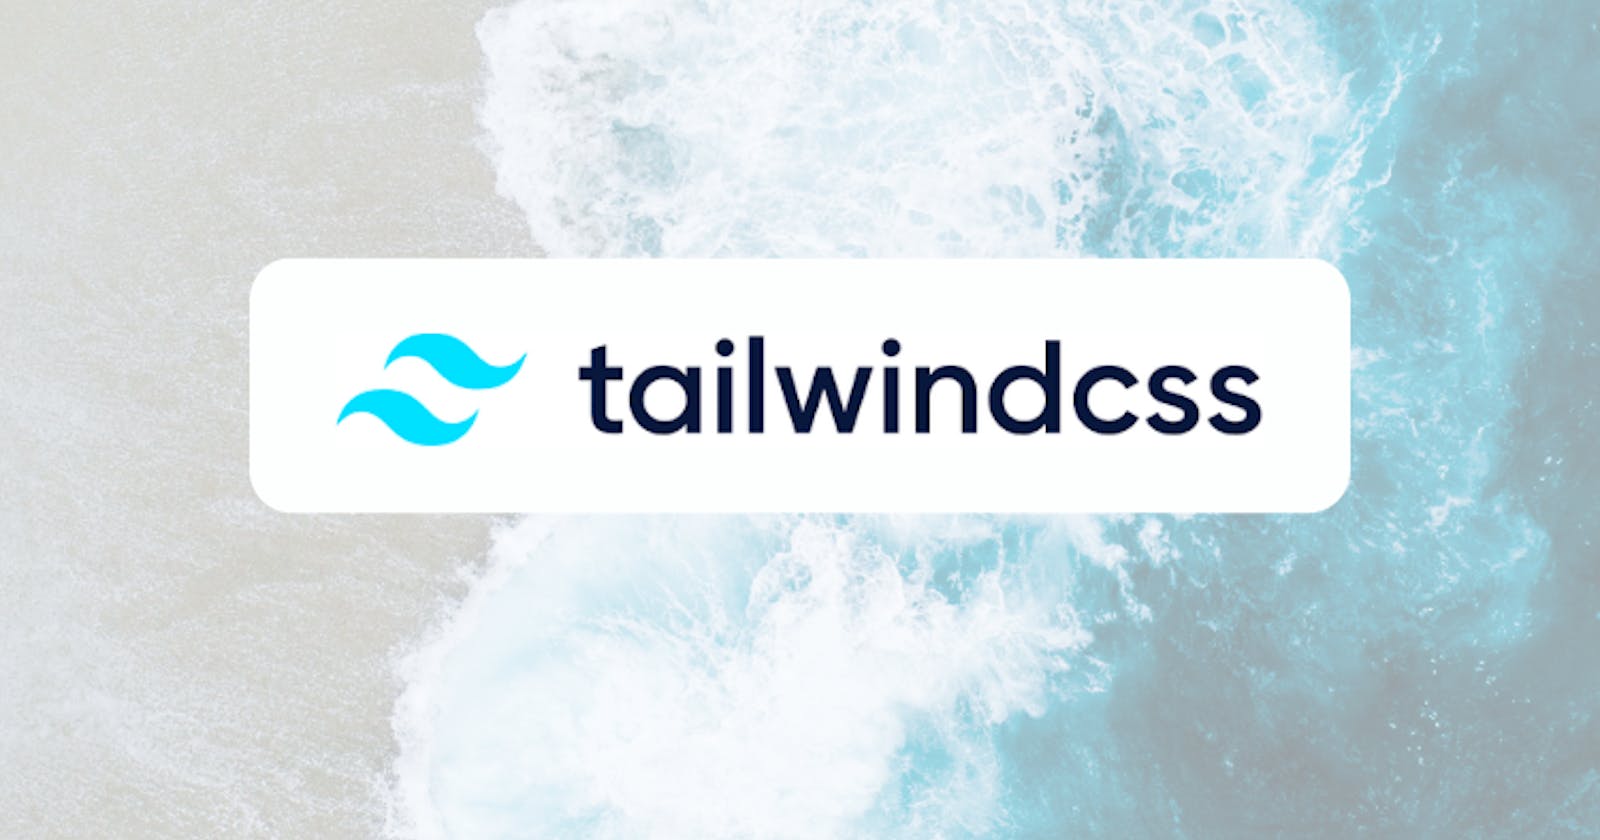 How to use Animations & Transitions in Tailwindcss